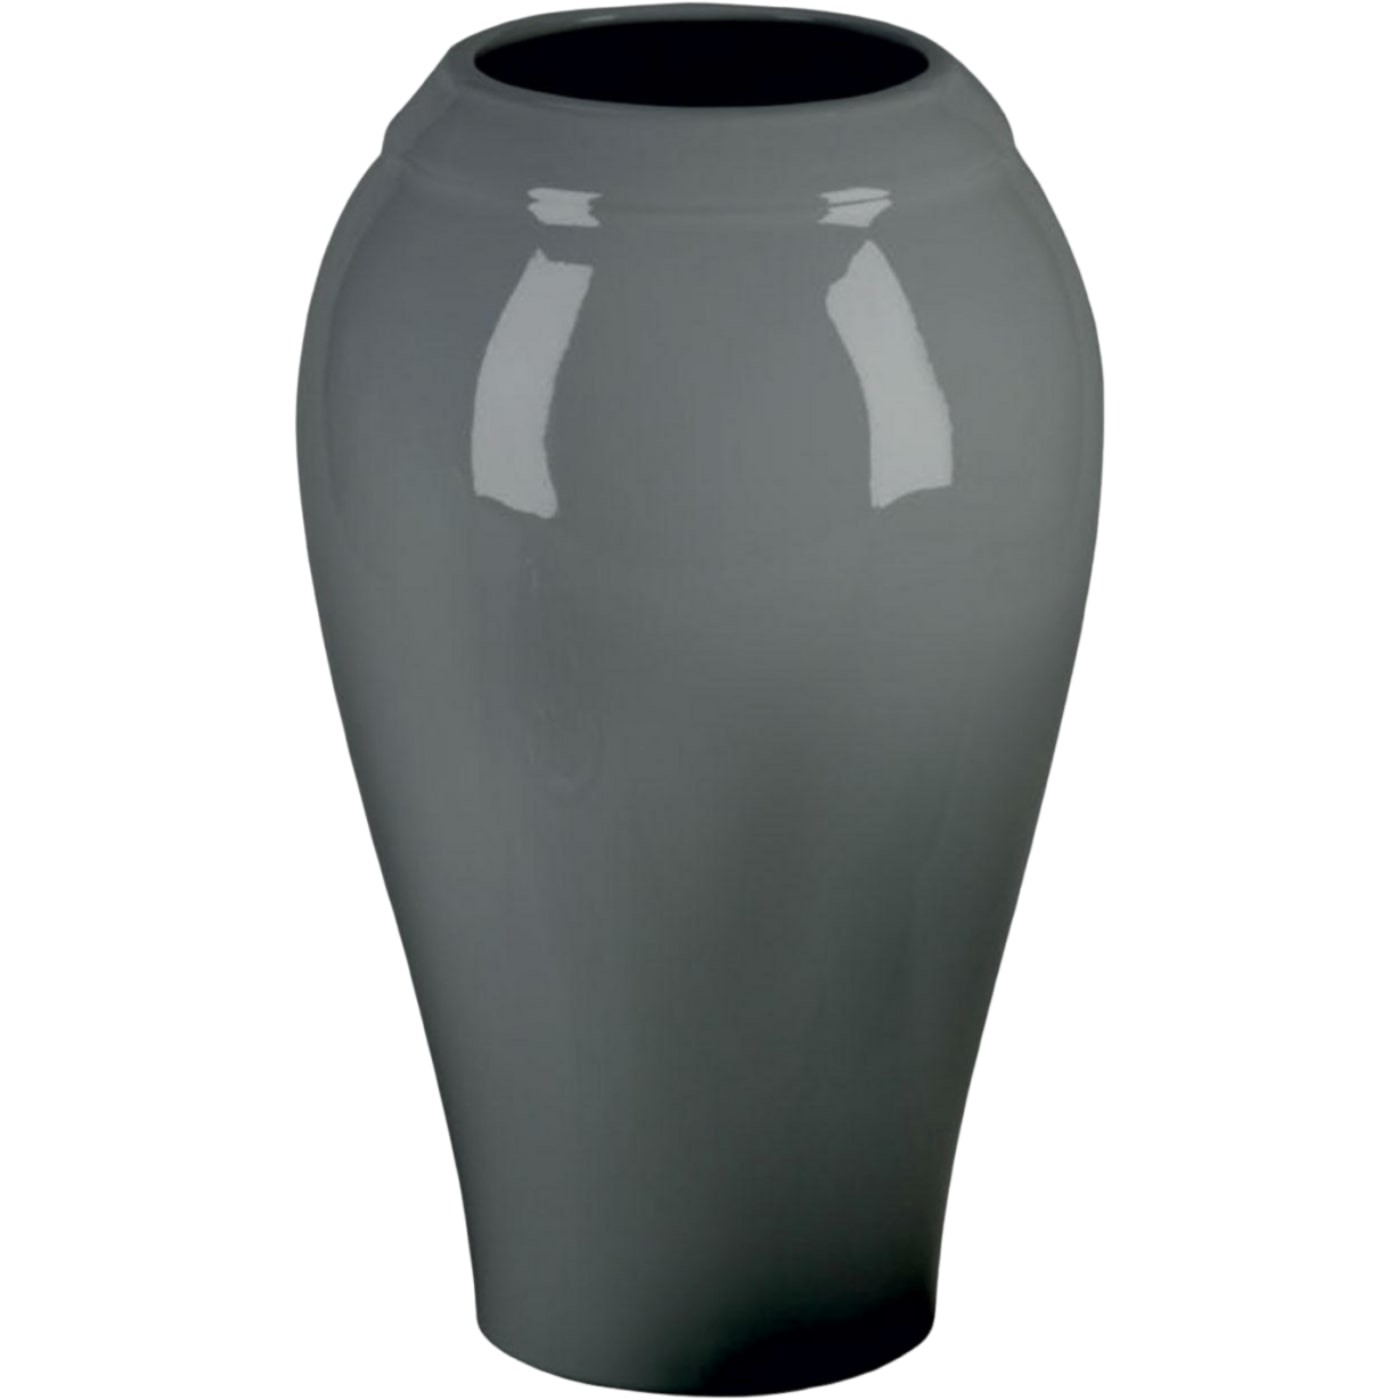 Grave vases Liscia gray 21x13cm - 8.3x5.1in In gray porcelain, ground attached LI144T/G